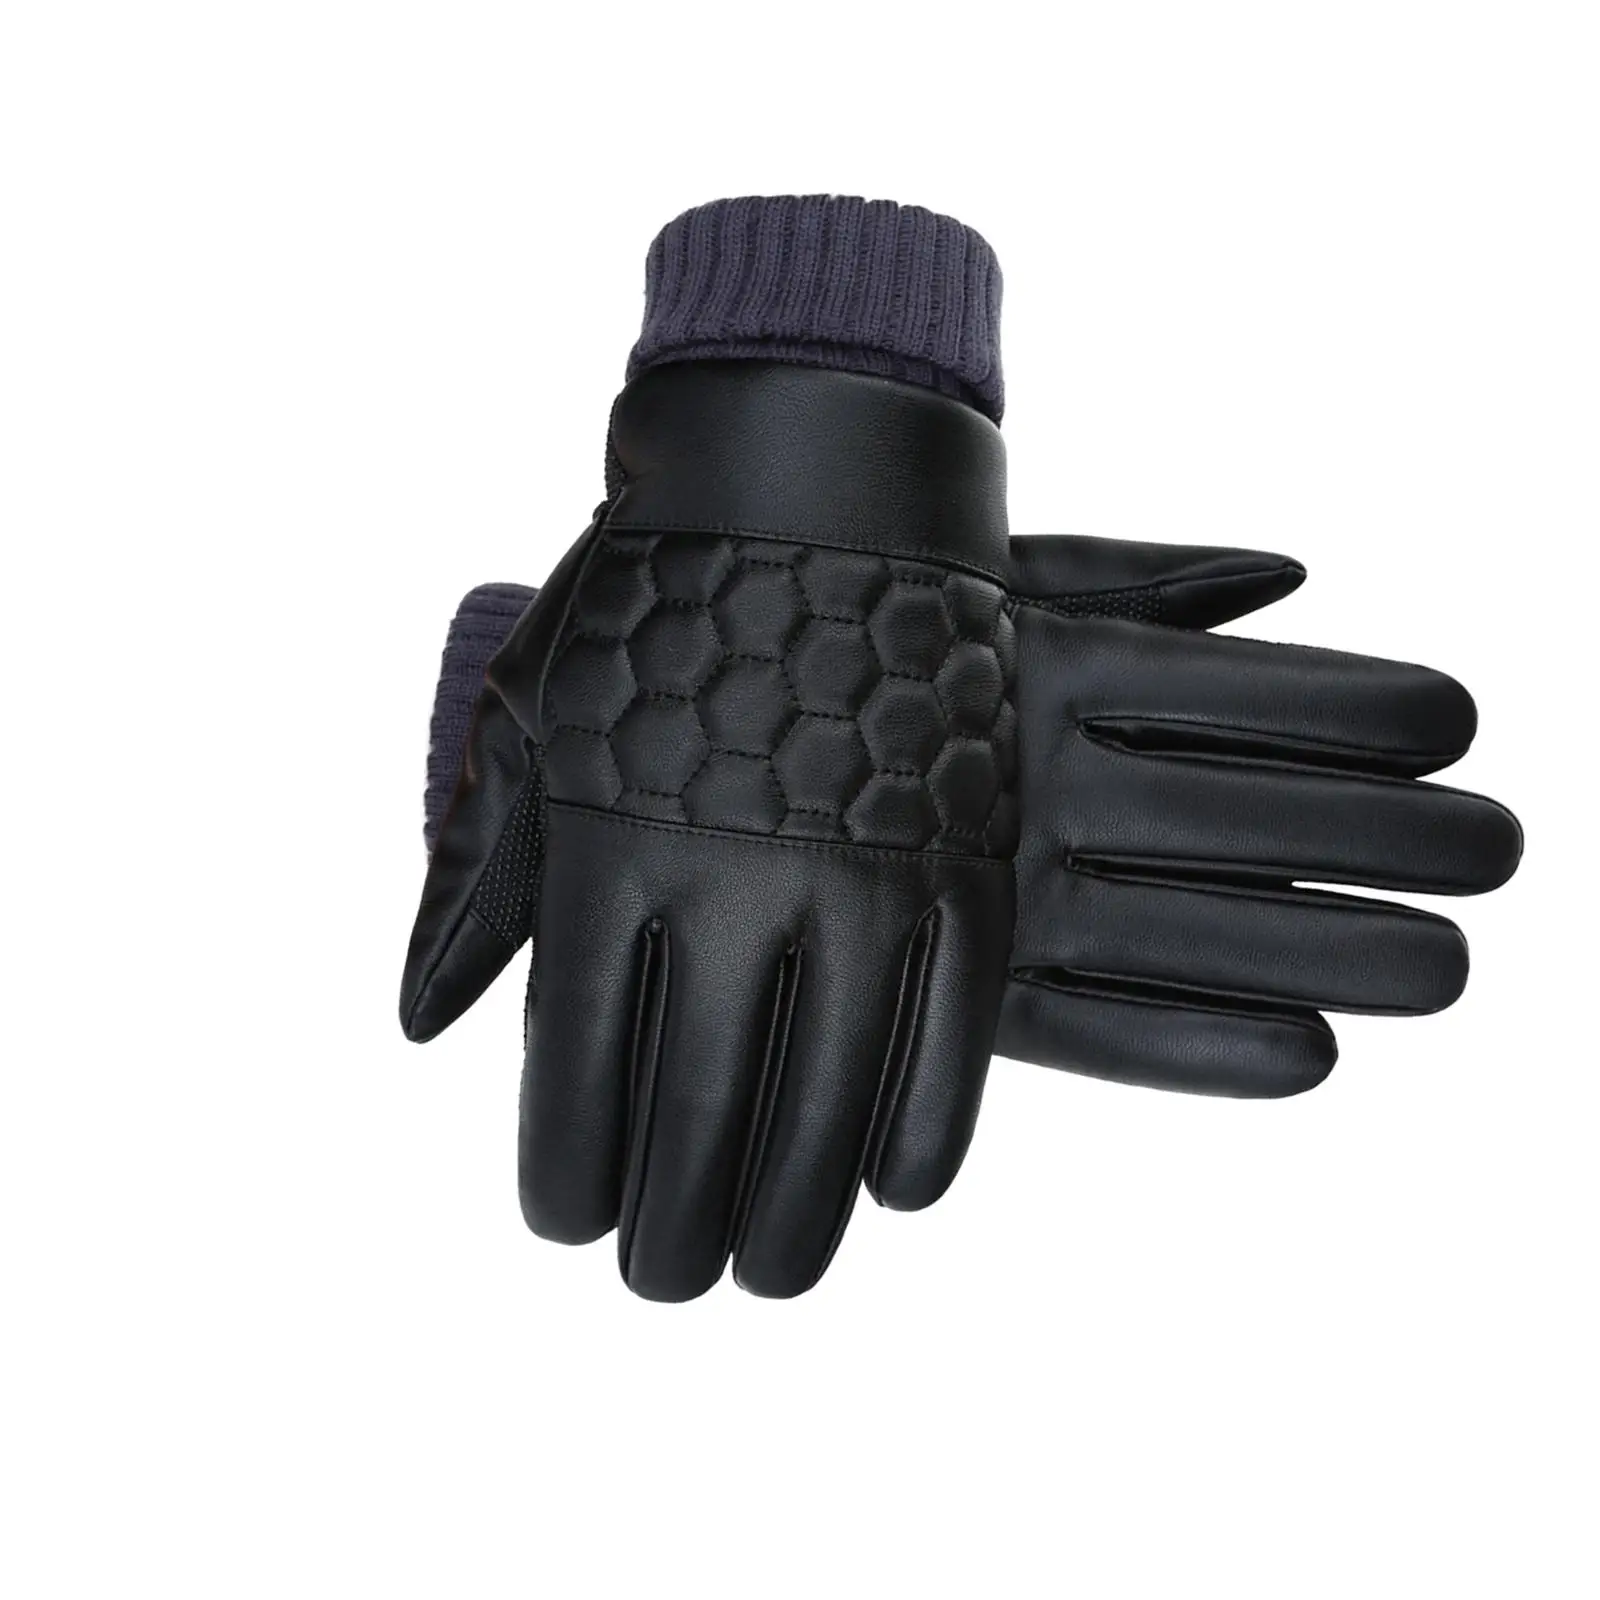 Winter Gloves Touchscreen Waterproof Warm Gloves for Cycling Outdoor Typing